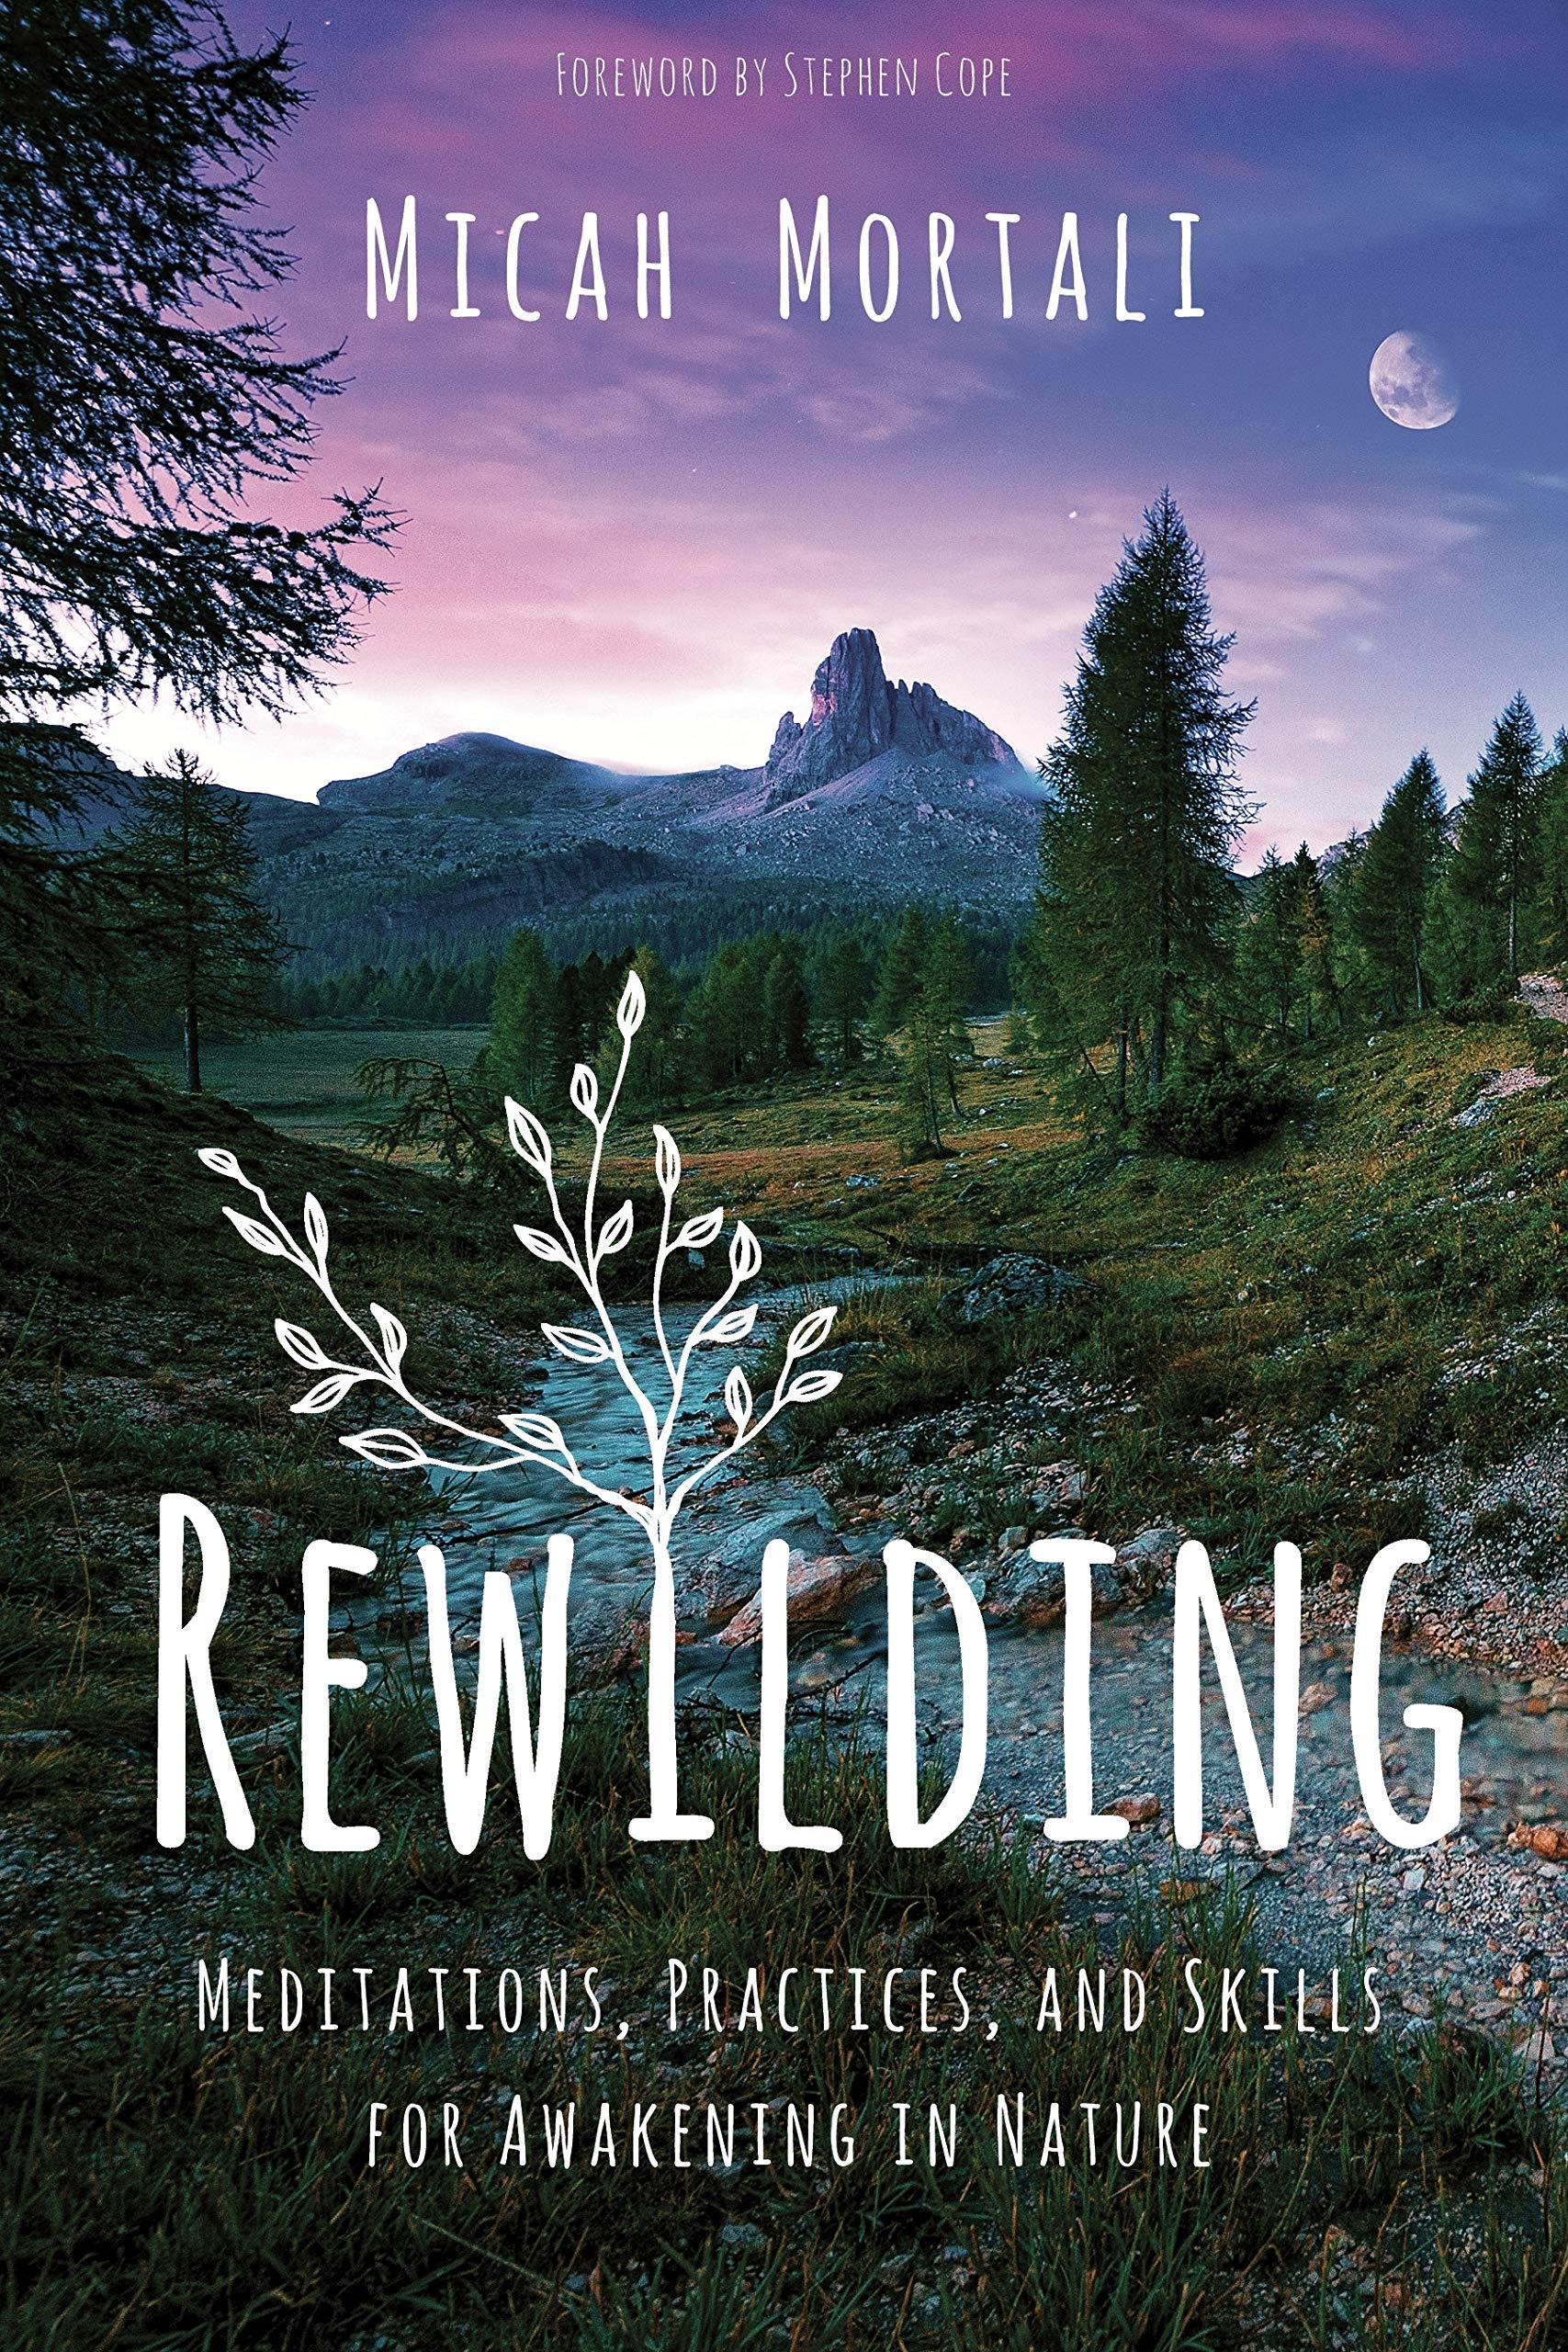 Rewilding: Meditations, Practices, and Skills for Awakening in Nature, by Micah Mortali (Author), Stephen Cope (Contributor) - Survival Books - Survival, Sustainable Living